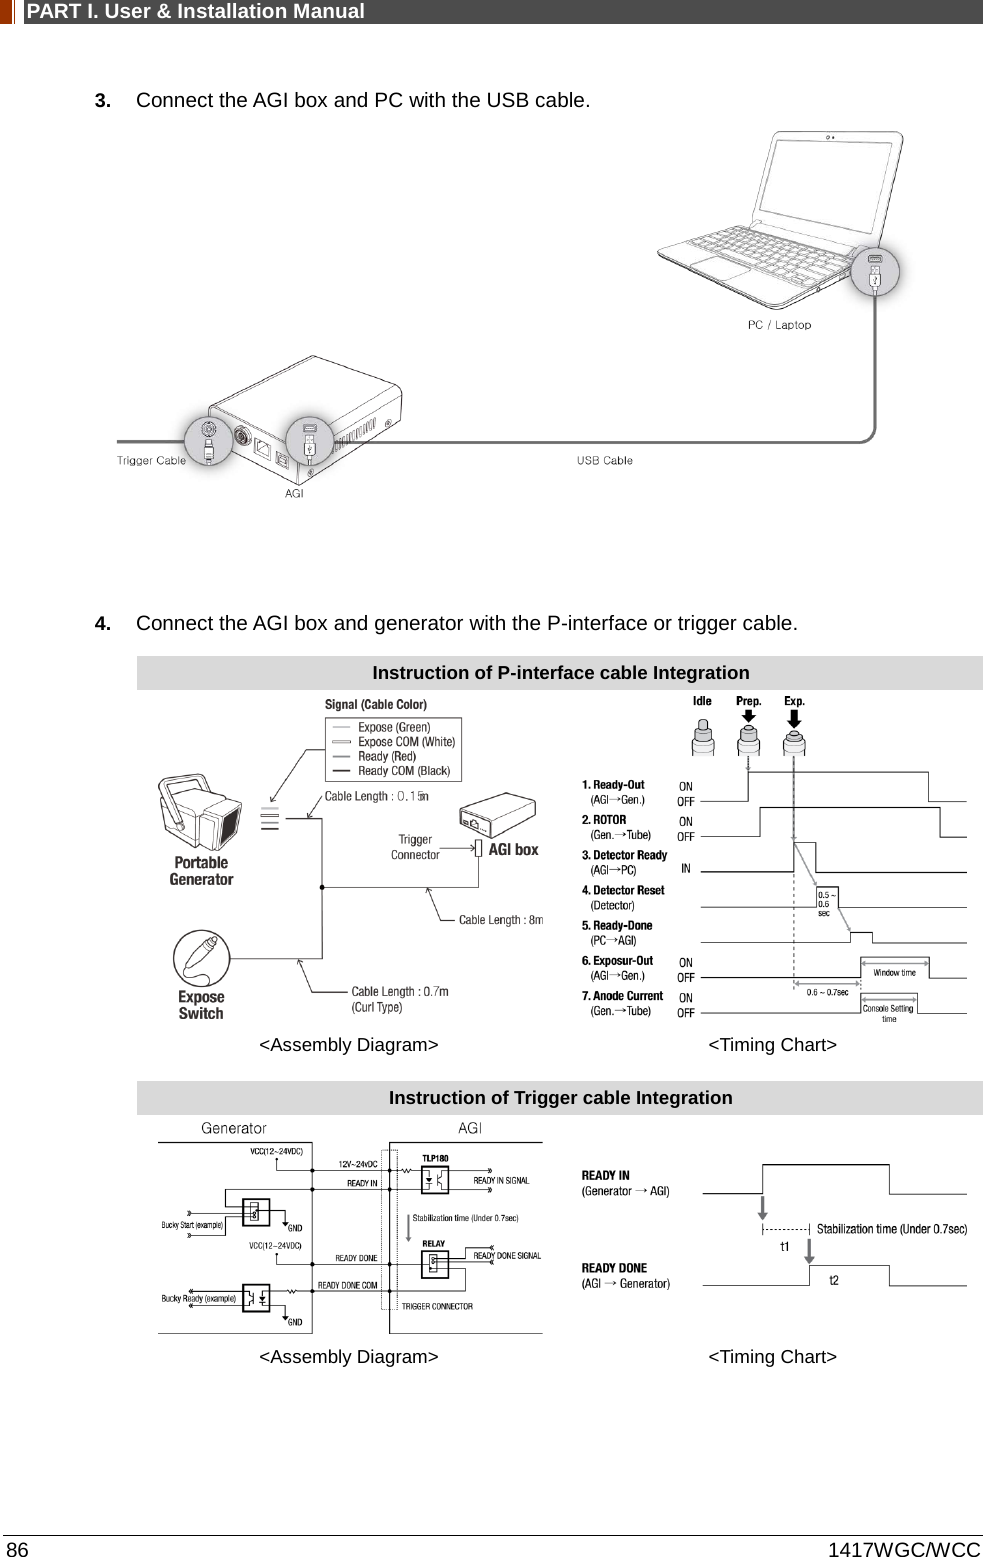 PART I. User &amp; Installation Manual 86 1417WGC/WCC 3. Connect the AGI box and PC with the USB cable.             4. Connect the AGI box and generator with the P-interface or trigger cable. Instruction of P-interface cable Integration   &lt;Assembly Diagram&gt; &lt;Timing Chart&gt;  Instruction of Trigger cable Integration   &lt;Assembly Diagram&gt; &lt;Timing Chart&gt;    